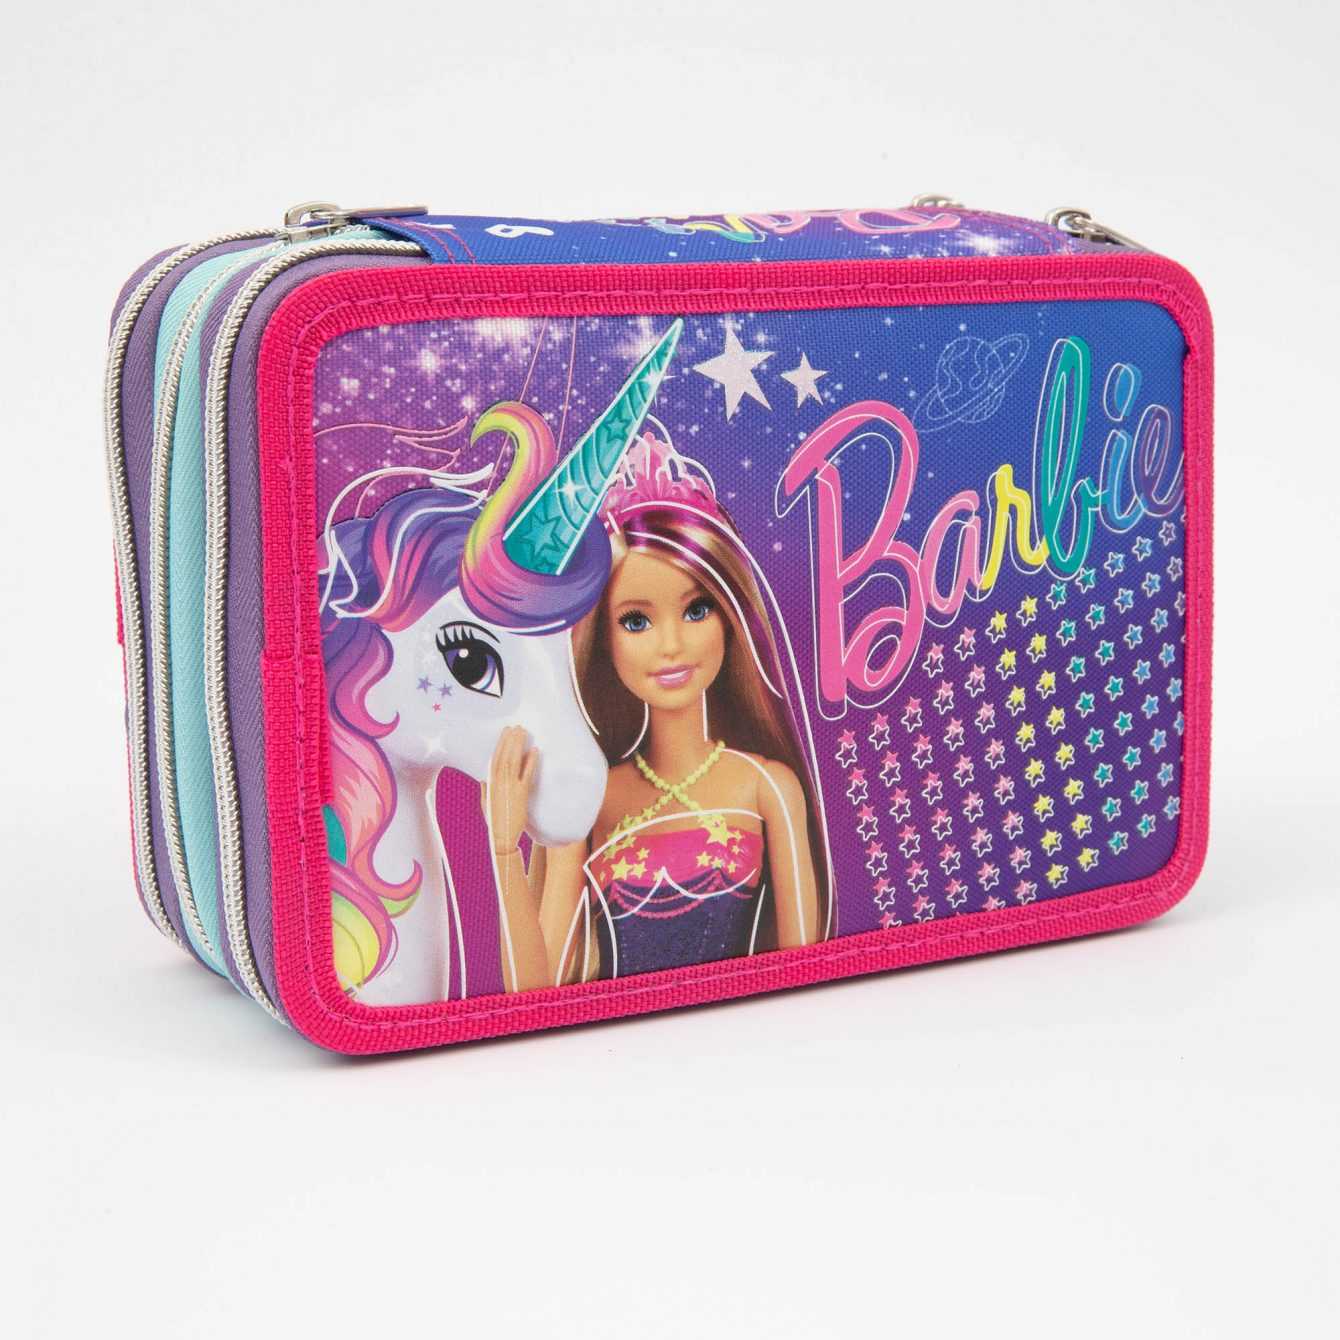 Barbie: here is the complete collection for back to school